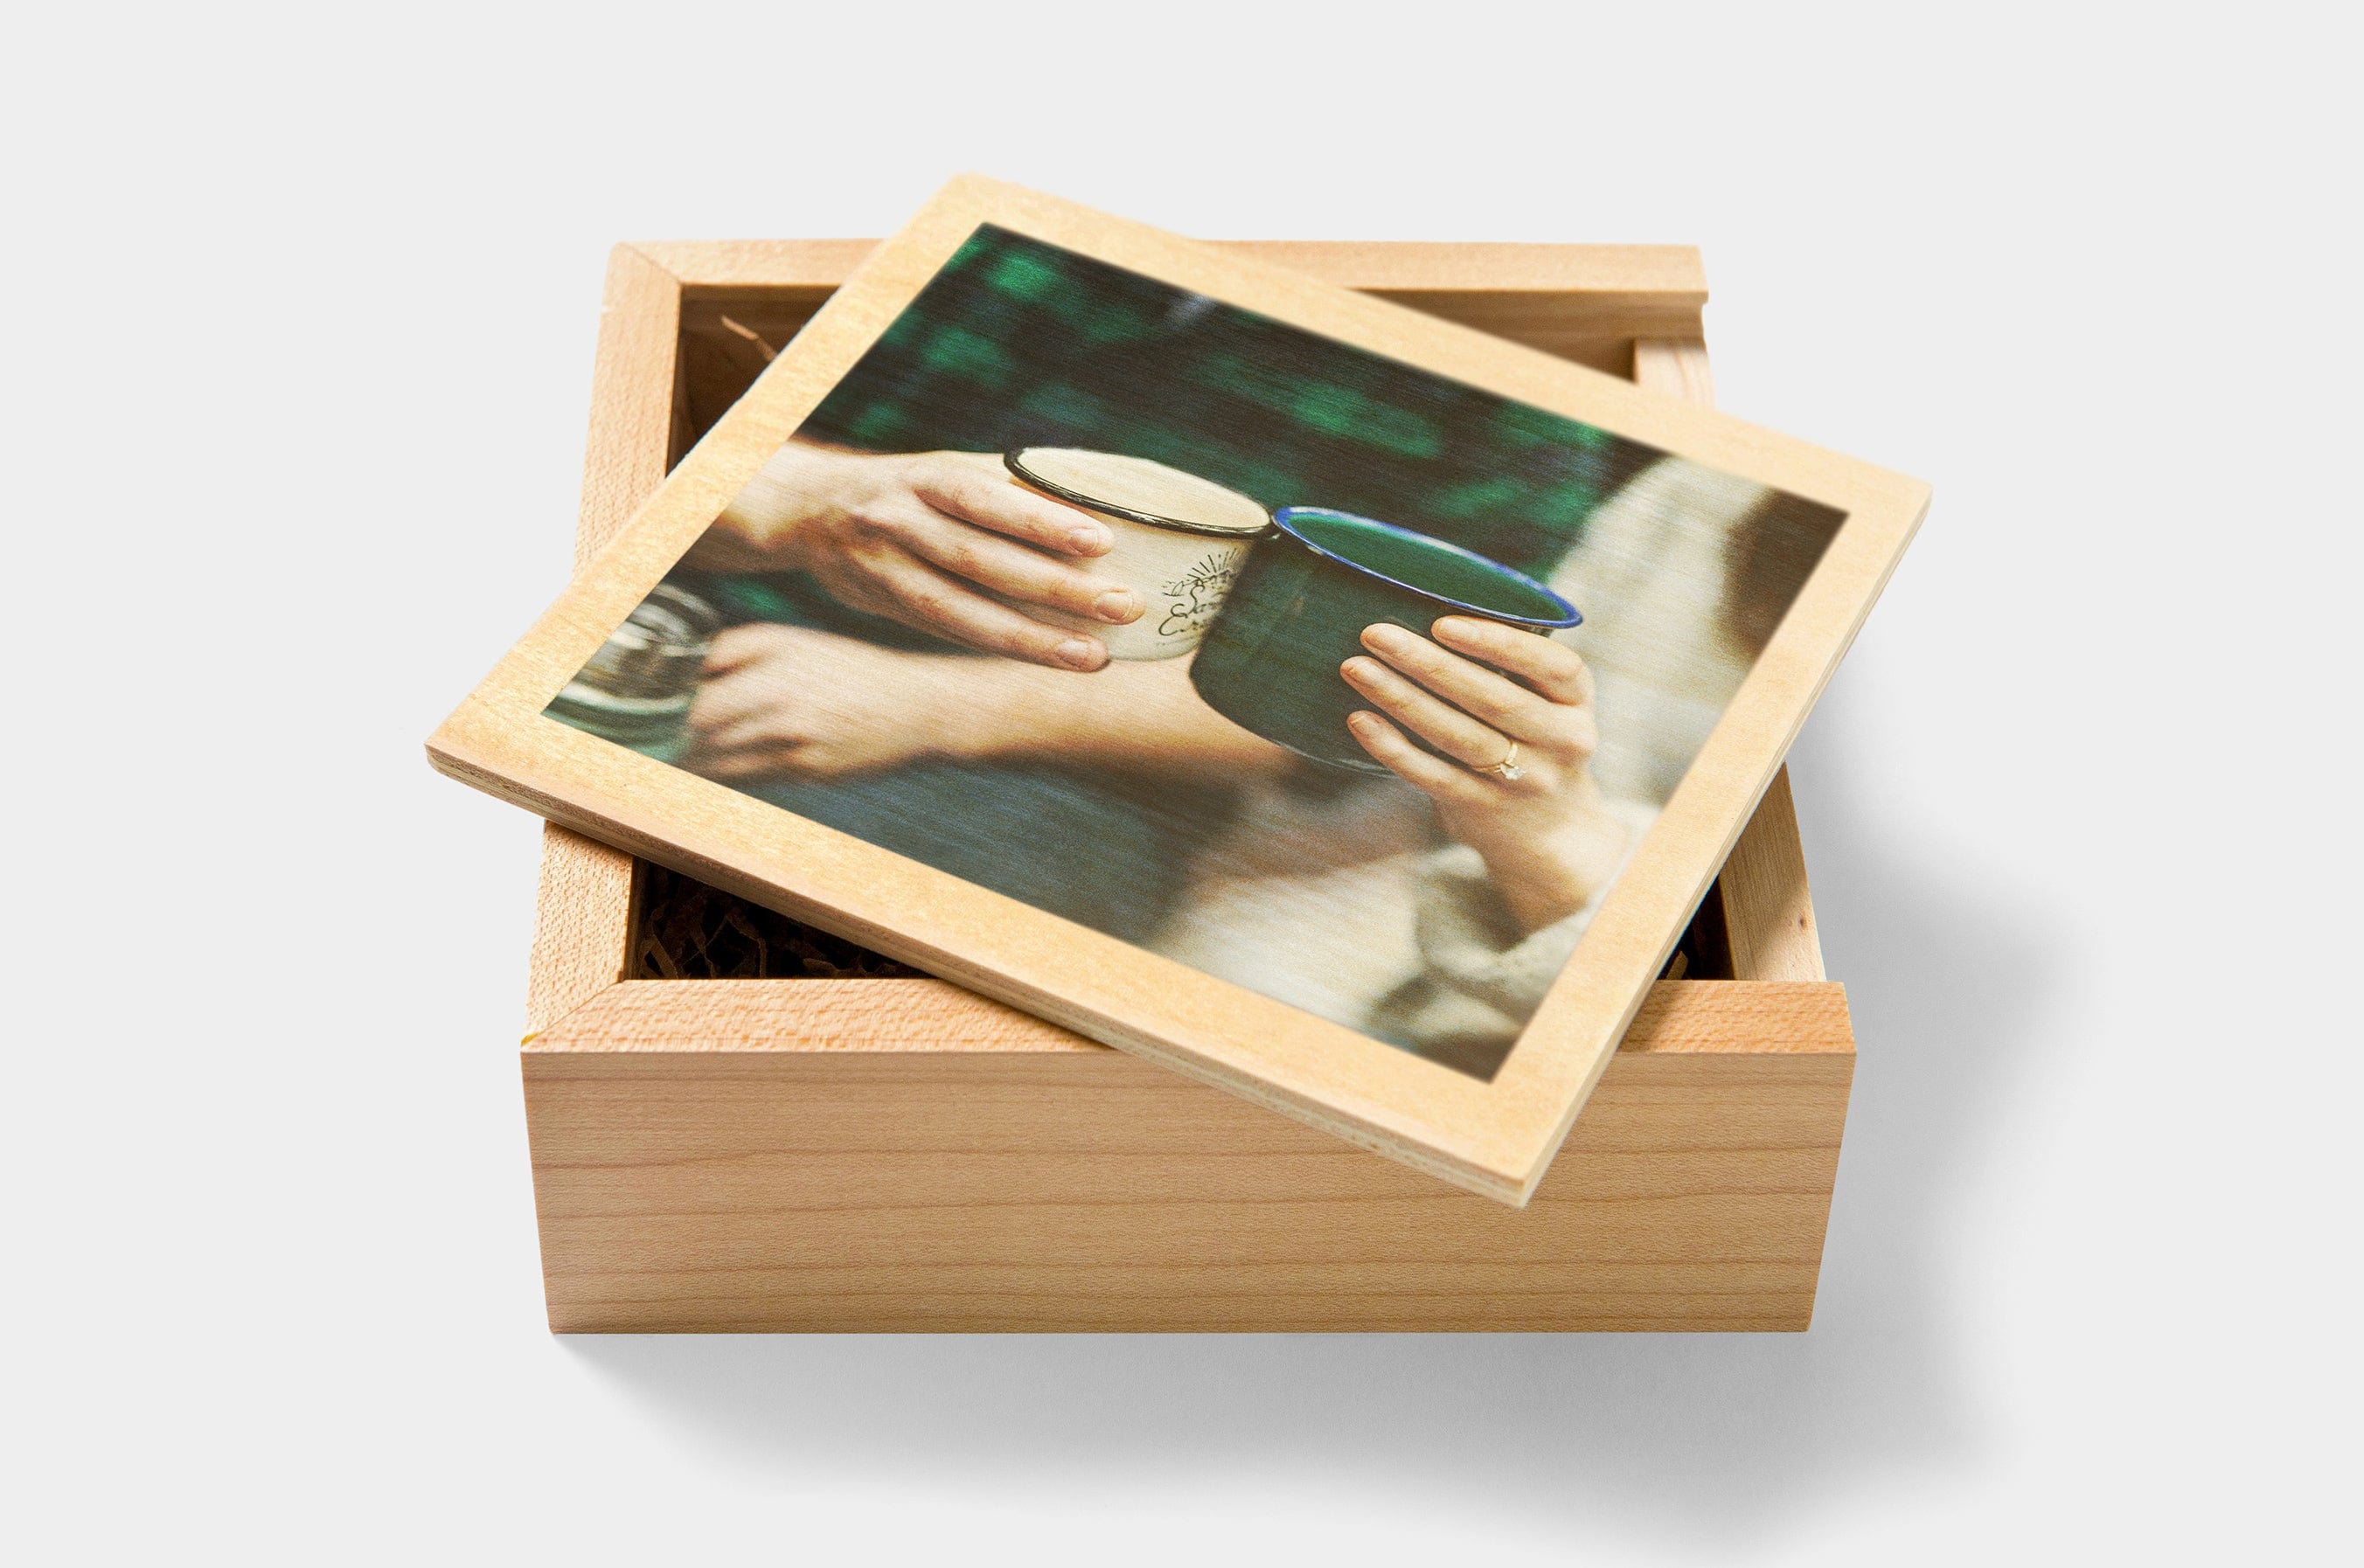 4x6 Wooden Photo Box with Matching Best USB 2.0 Flash Drive